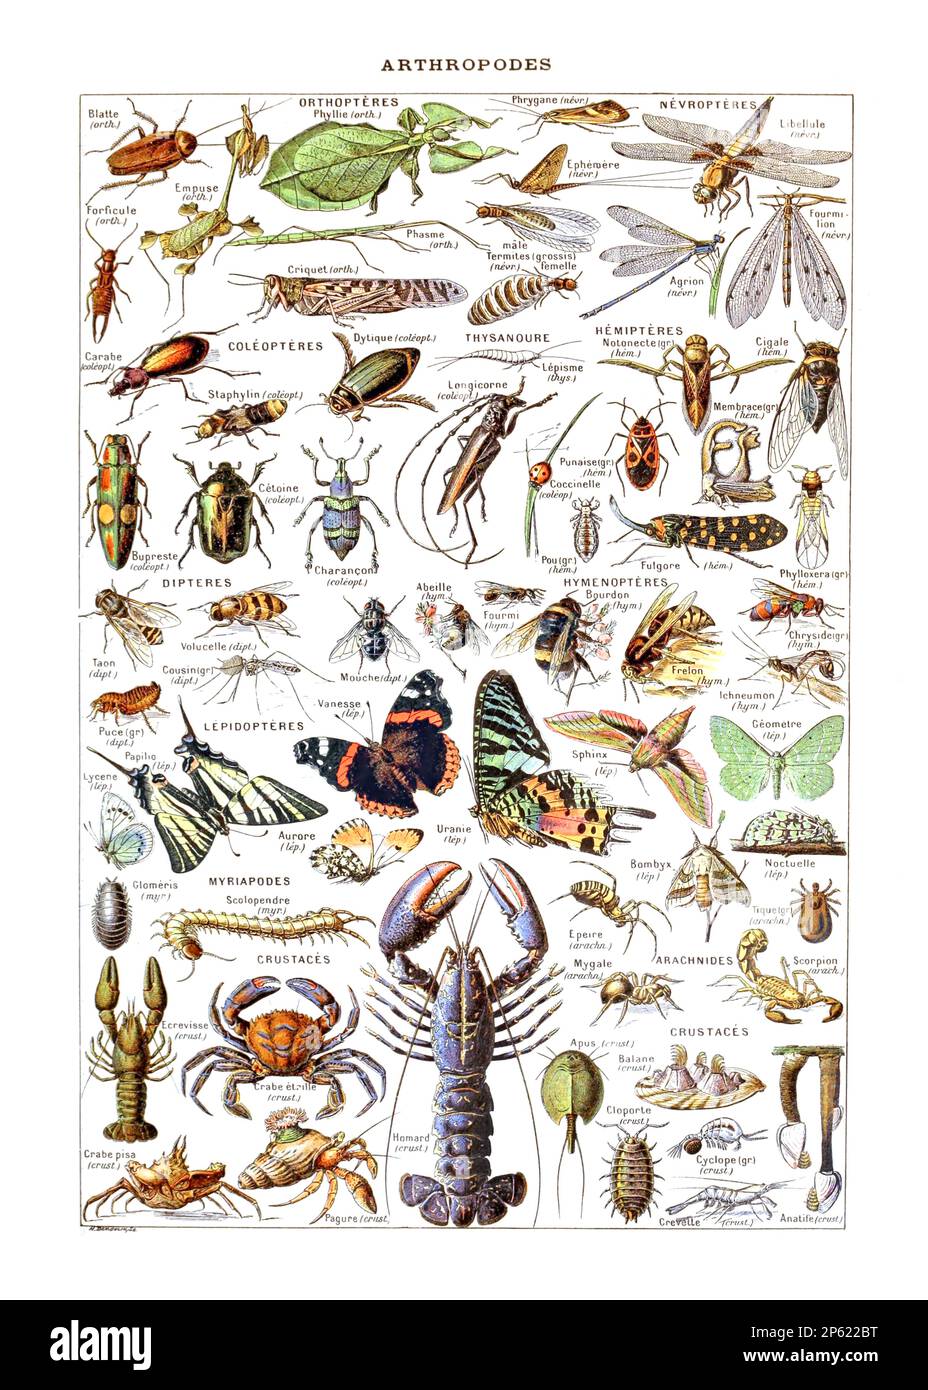 Vintage Illustration of Arthropods Species, French Poster by Adolphe Millot 1900's Stock Photo